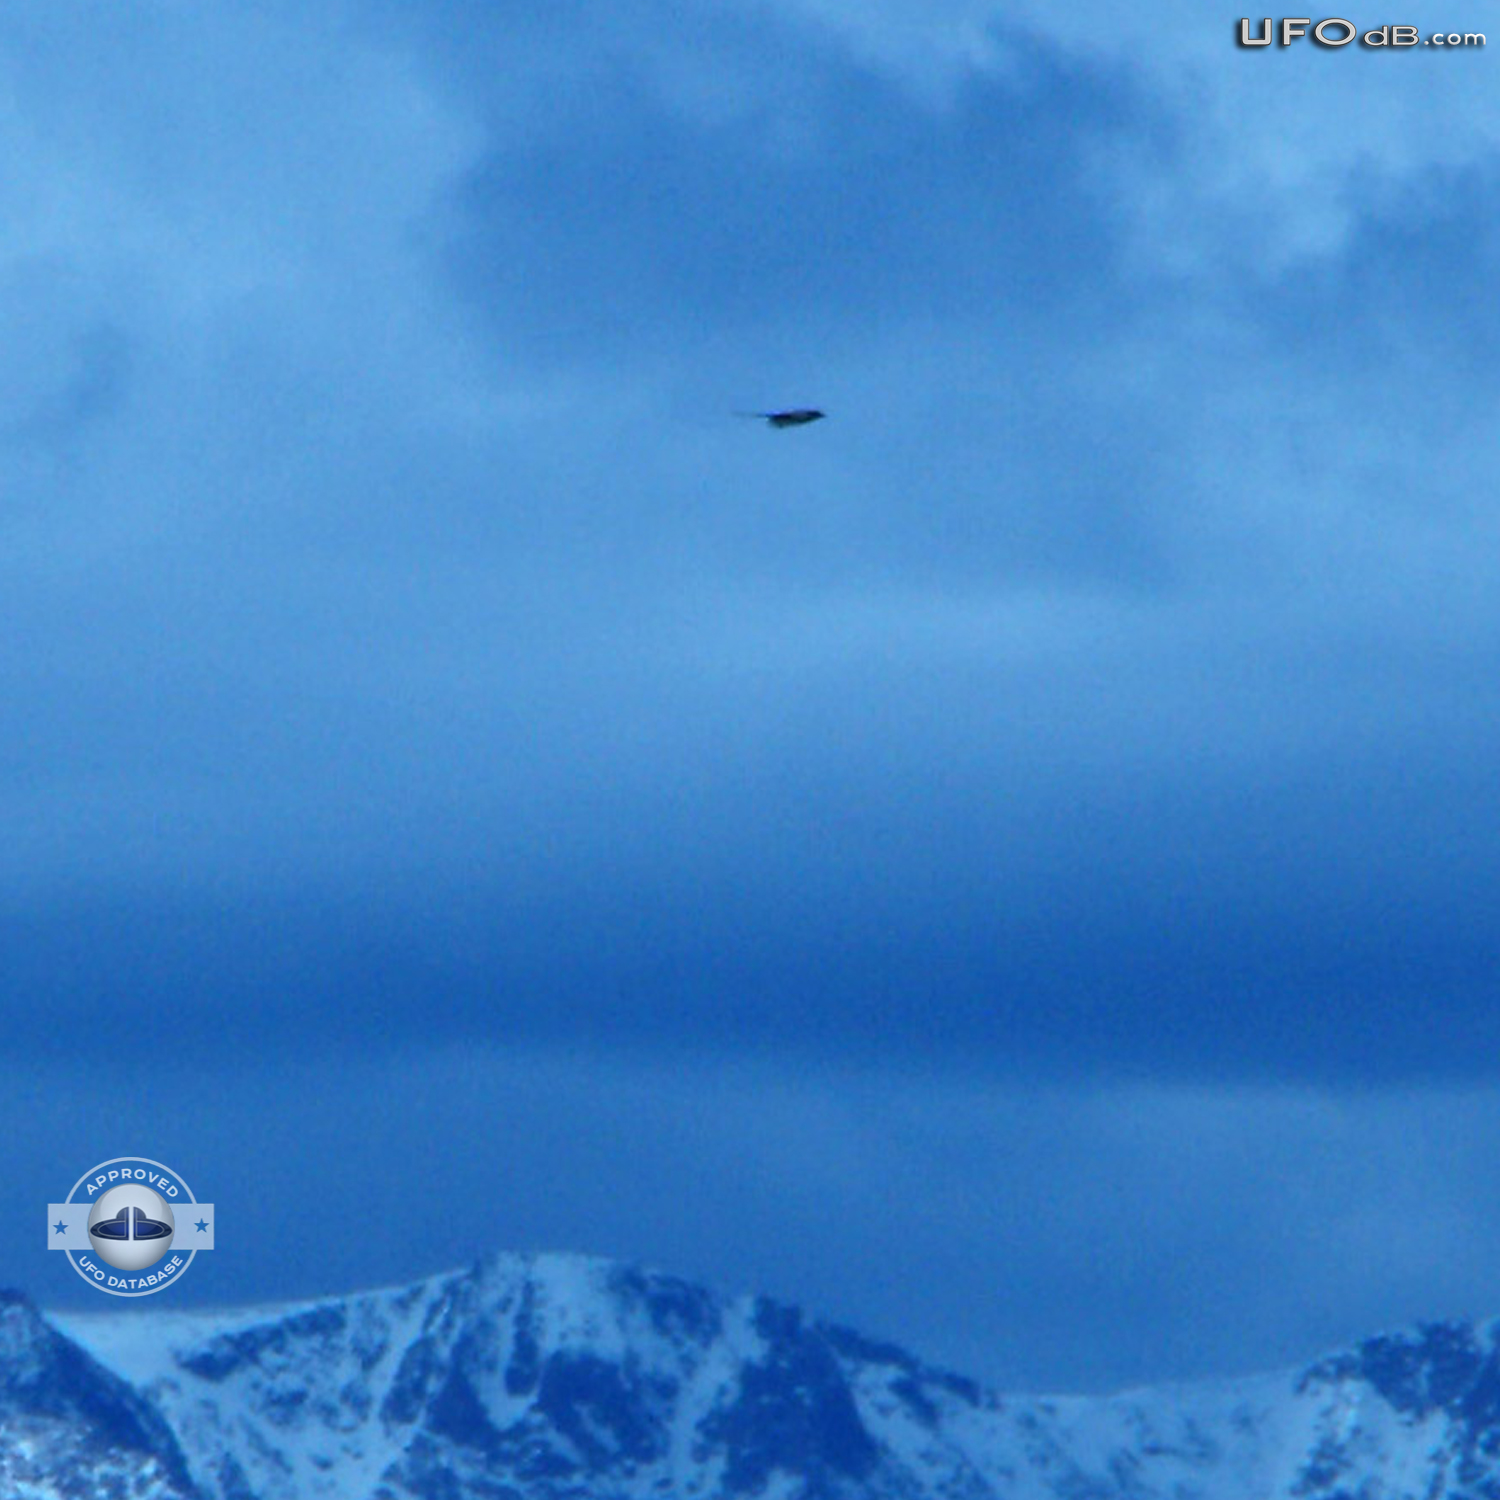 Panoramic picture capture a passing UFO in Colorado, USA | May 21 2011 UFO Picture #325-2